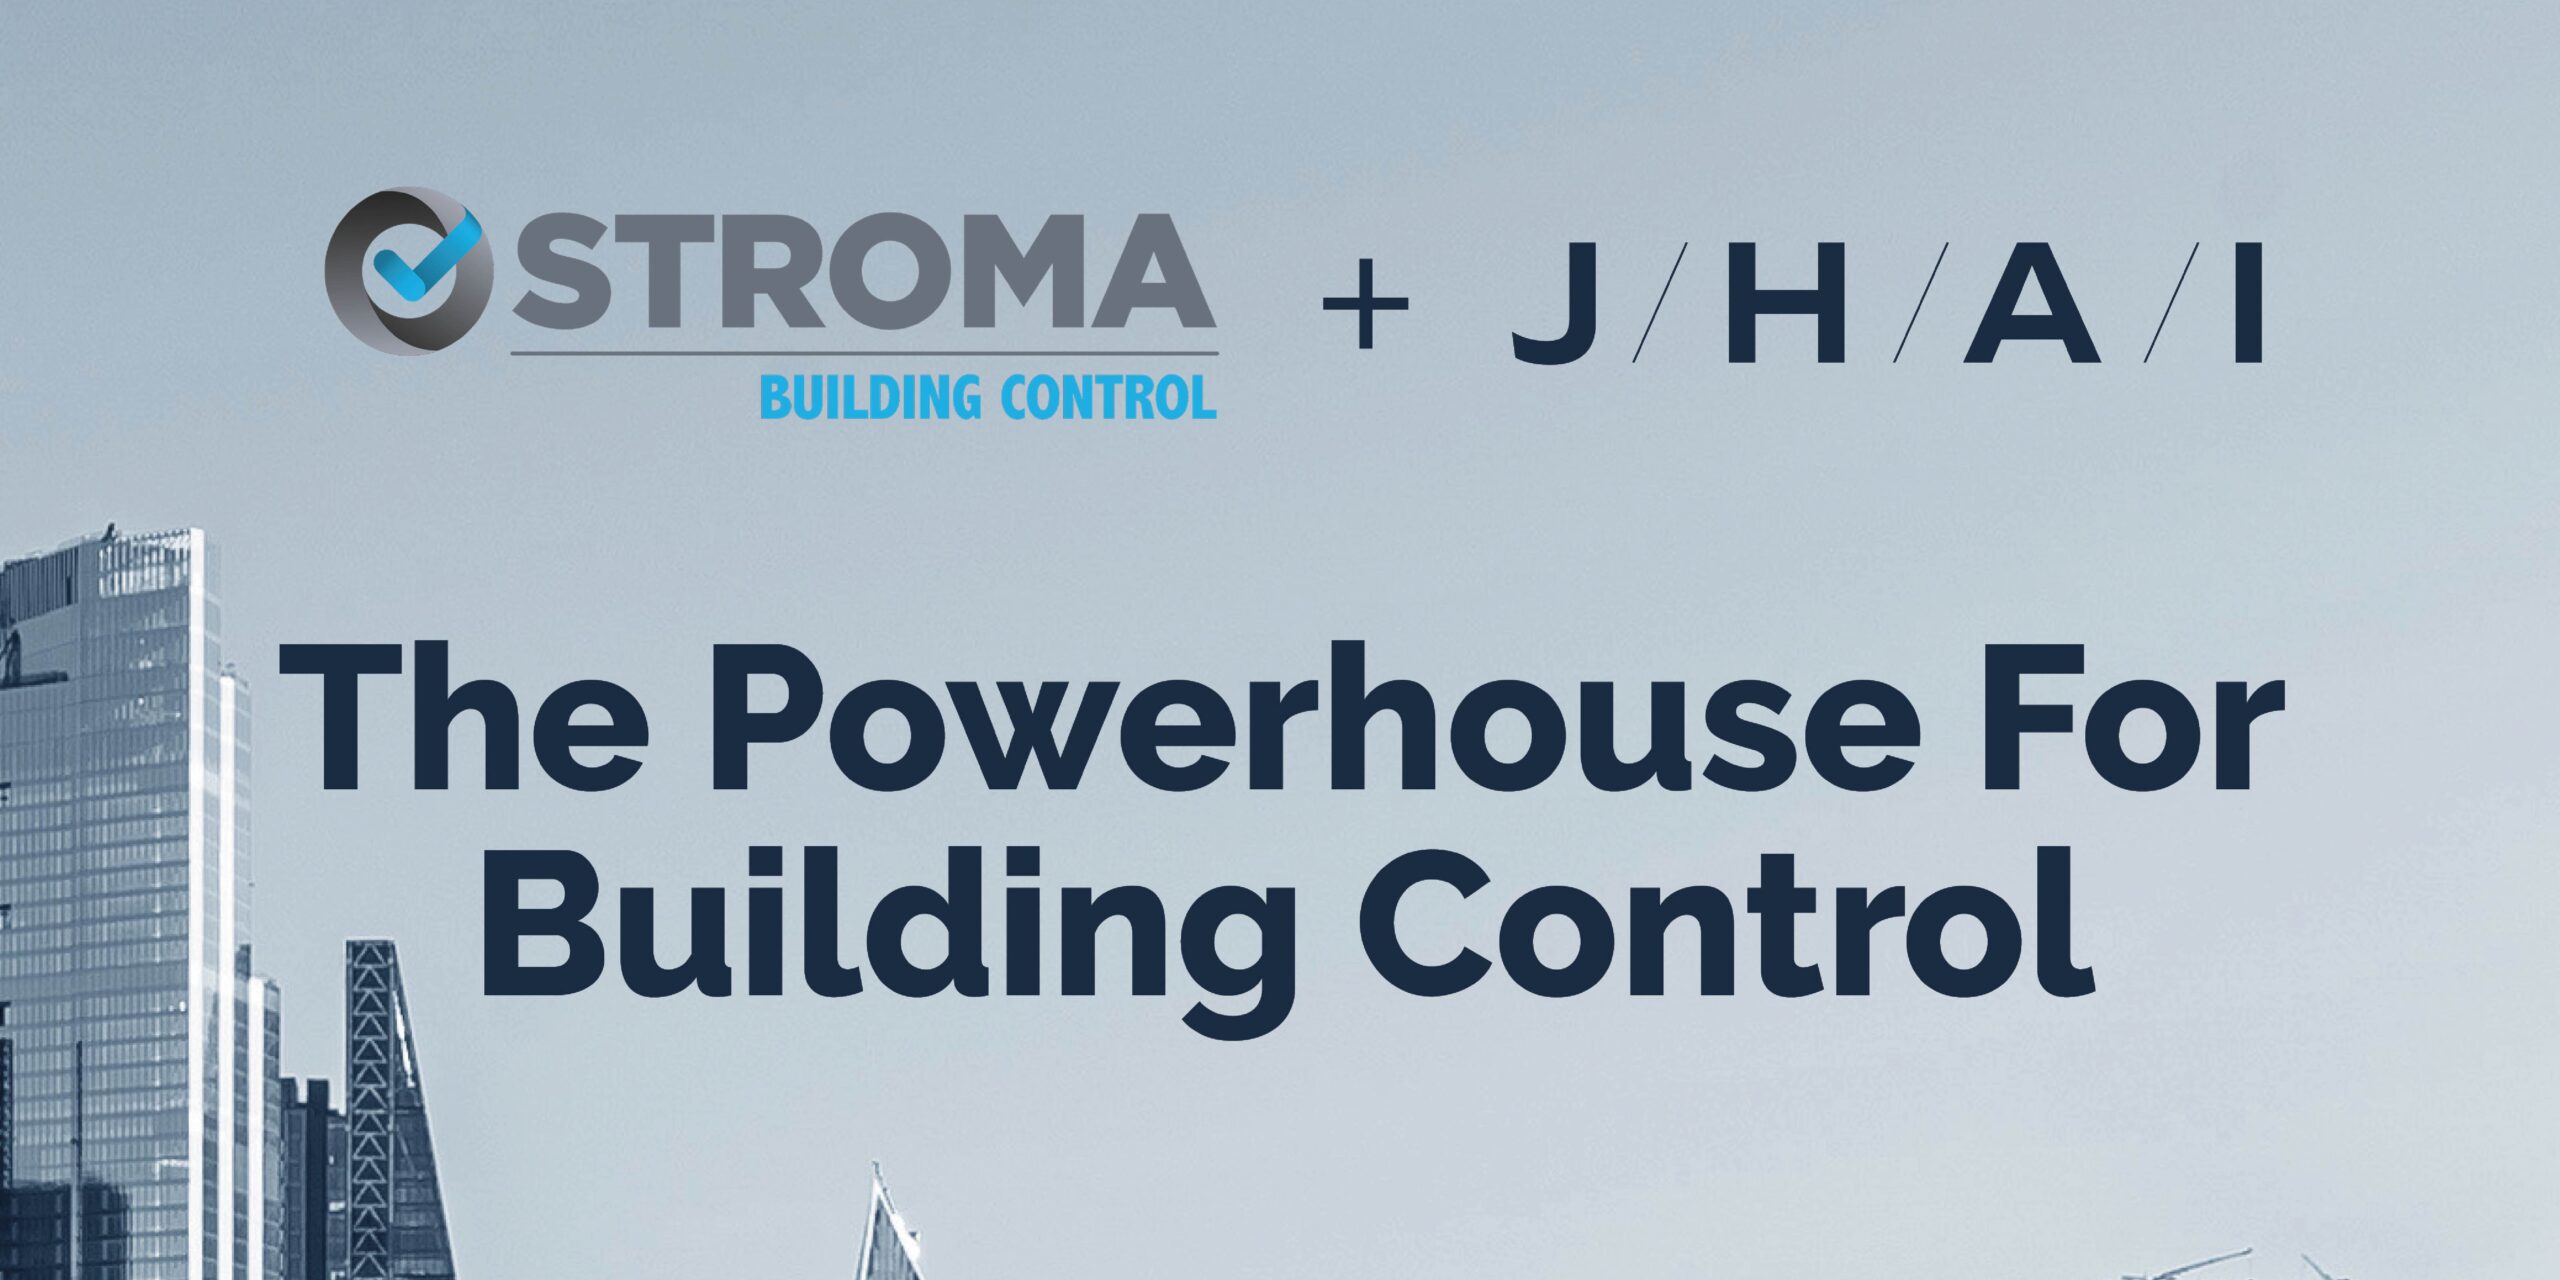 The Powerhouse For Building Control